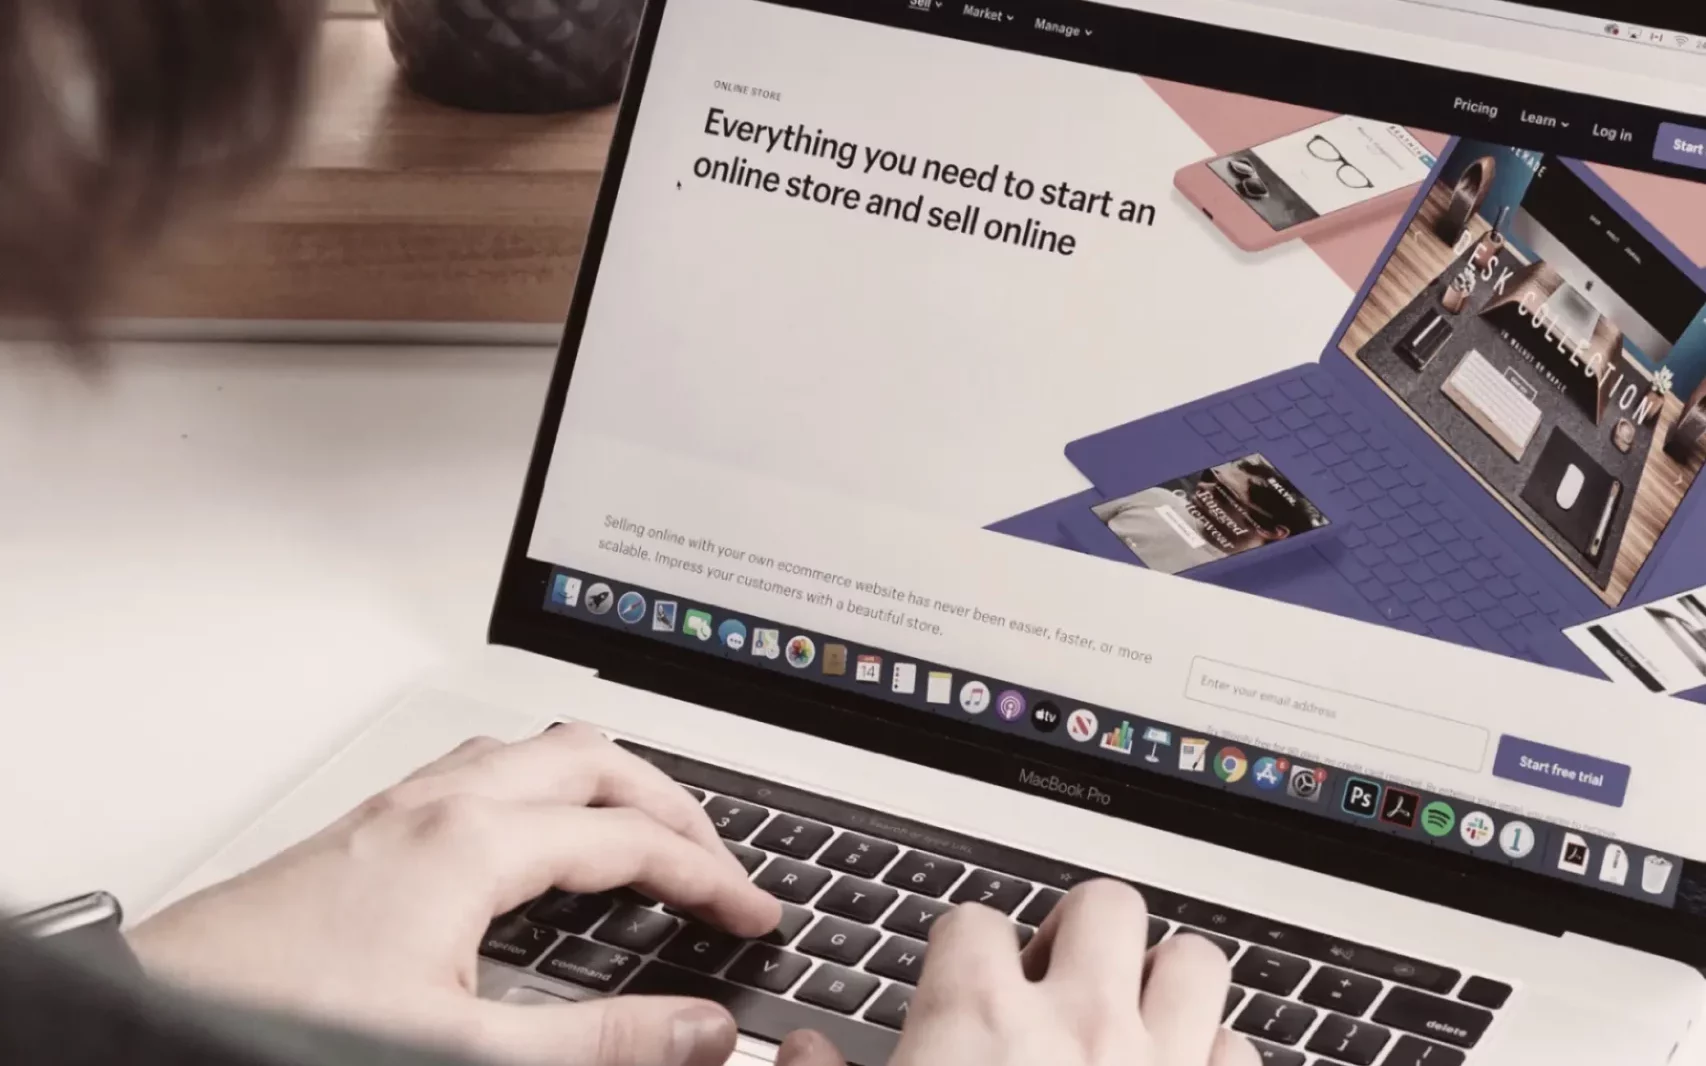 Laptop mit dem Satz 'Everything you need to start an online store and sell online', passend zum Thema Fulfillment-Optimierung in Shopify